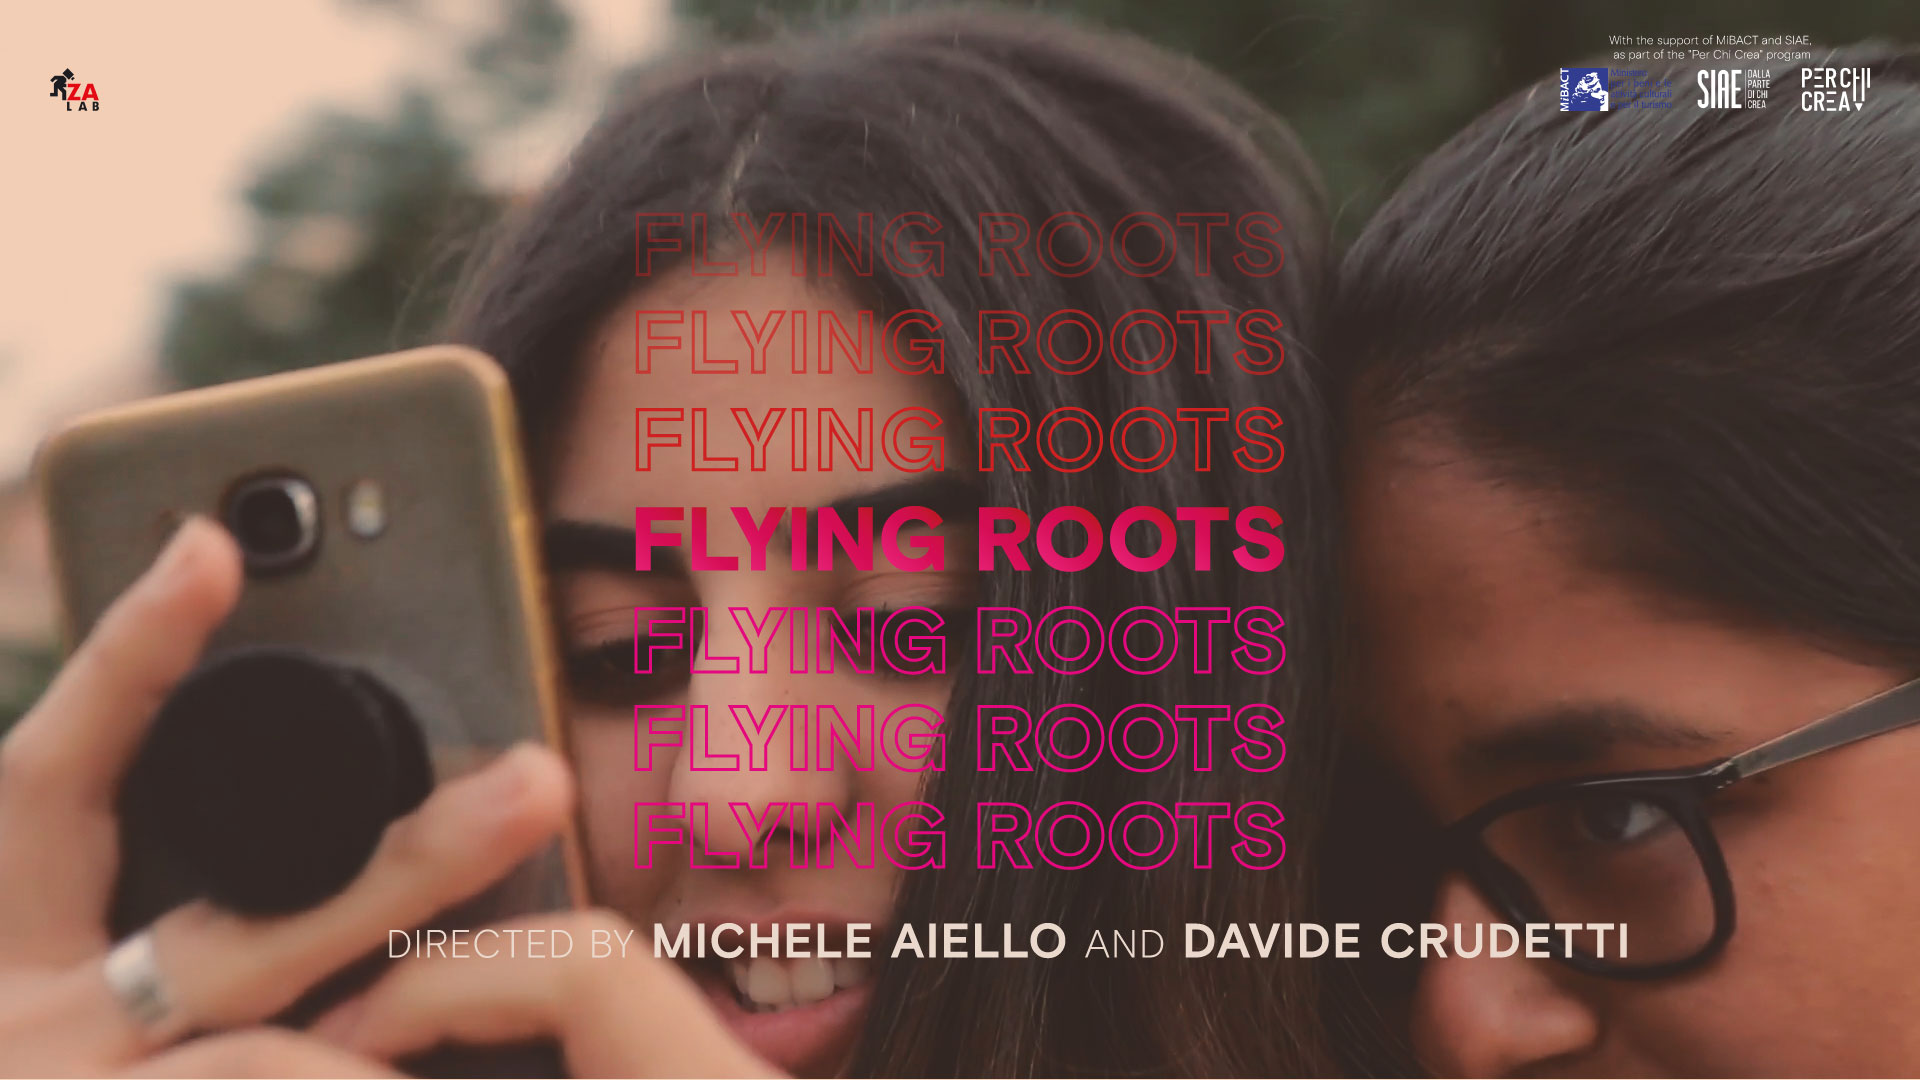 Budapest Conscious Cinema Presents: 'Flying Roots', 17 March